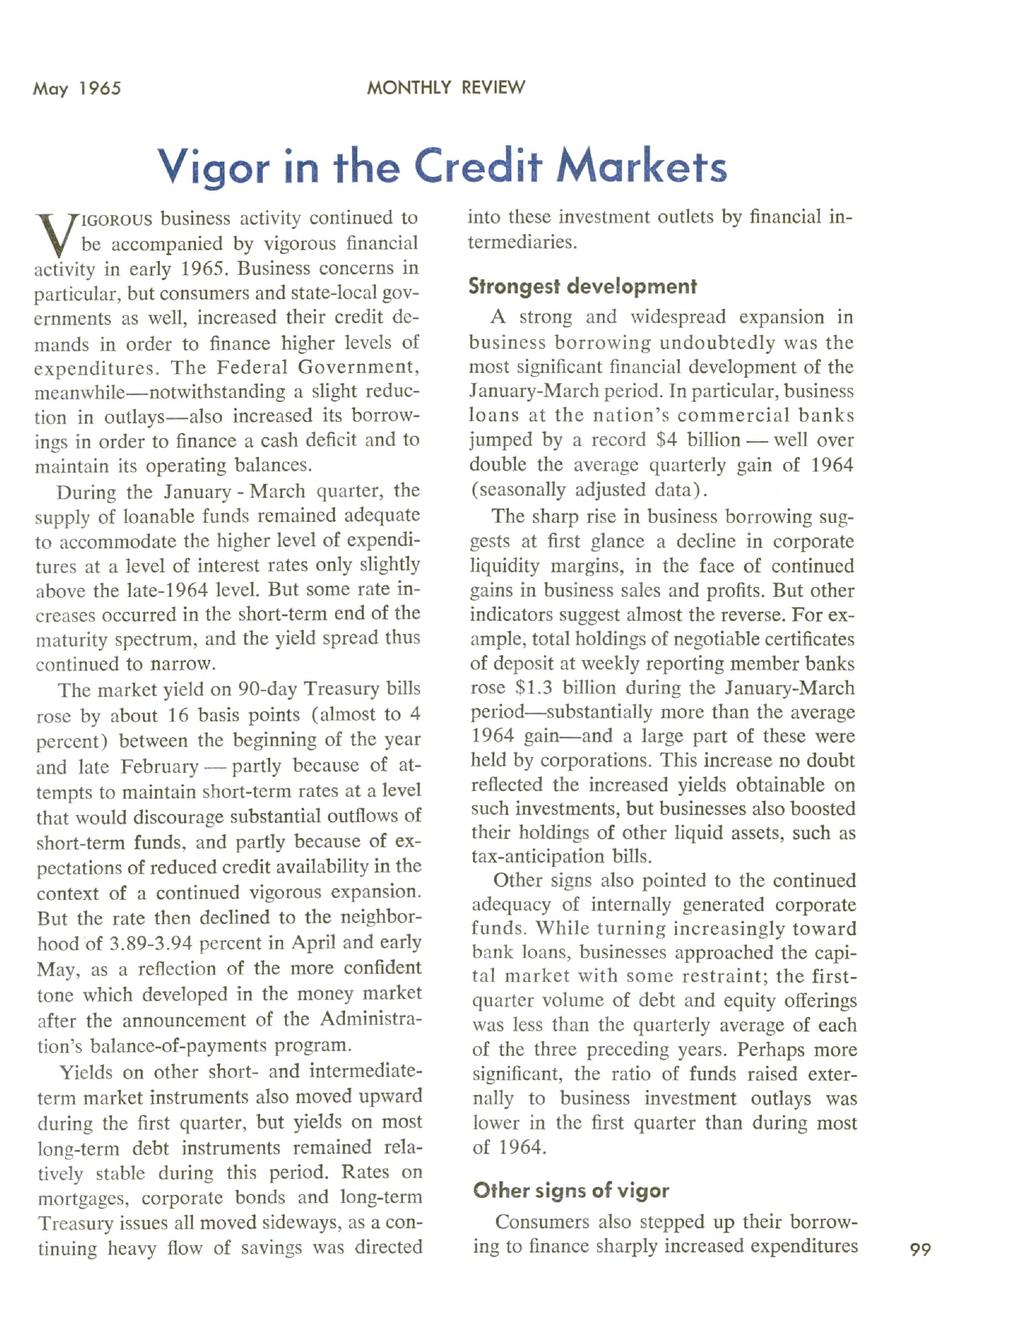 May 1965 MONTHLY REVIEW Vigor in the Credit Markets Vi g o r o u s business activity continued to be accompanied by vigorous financial activity in early 1965.